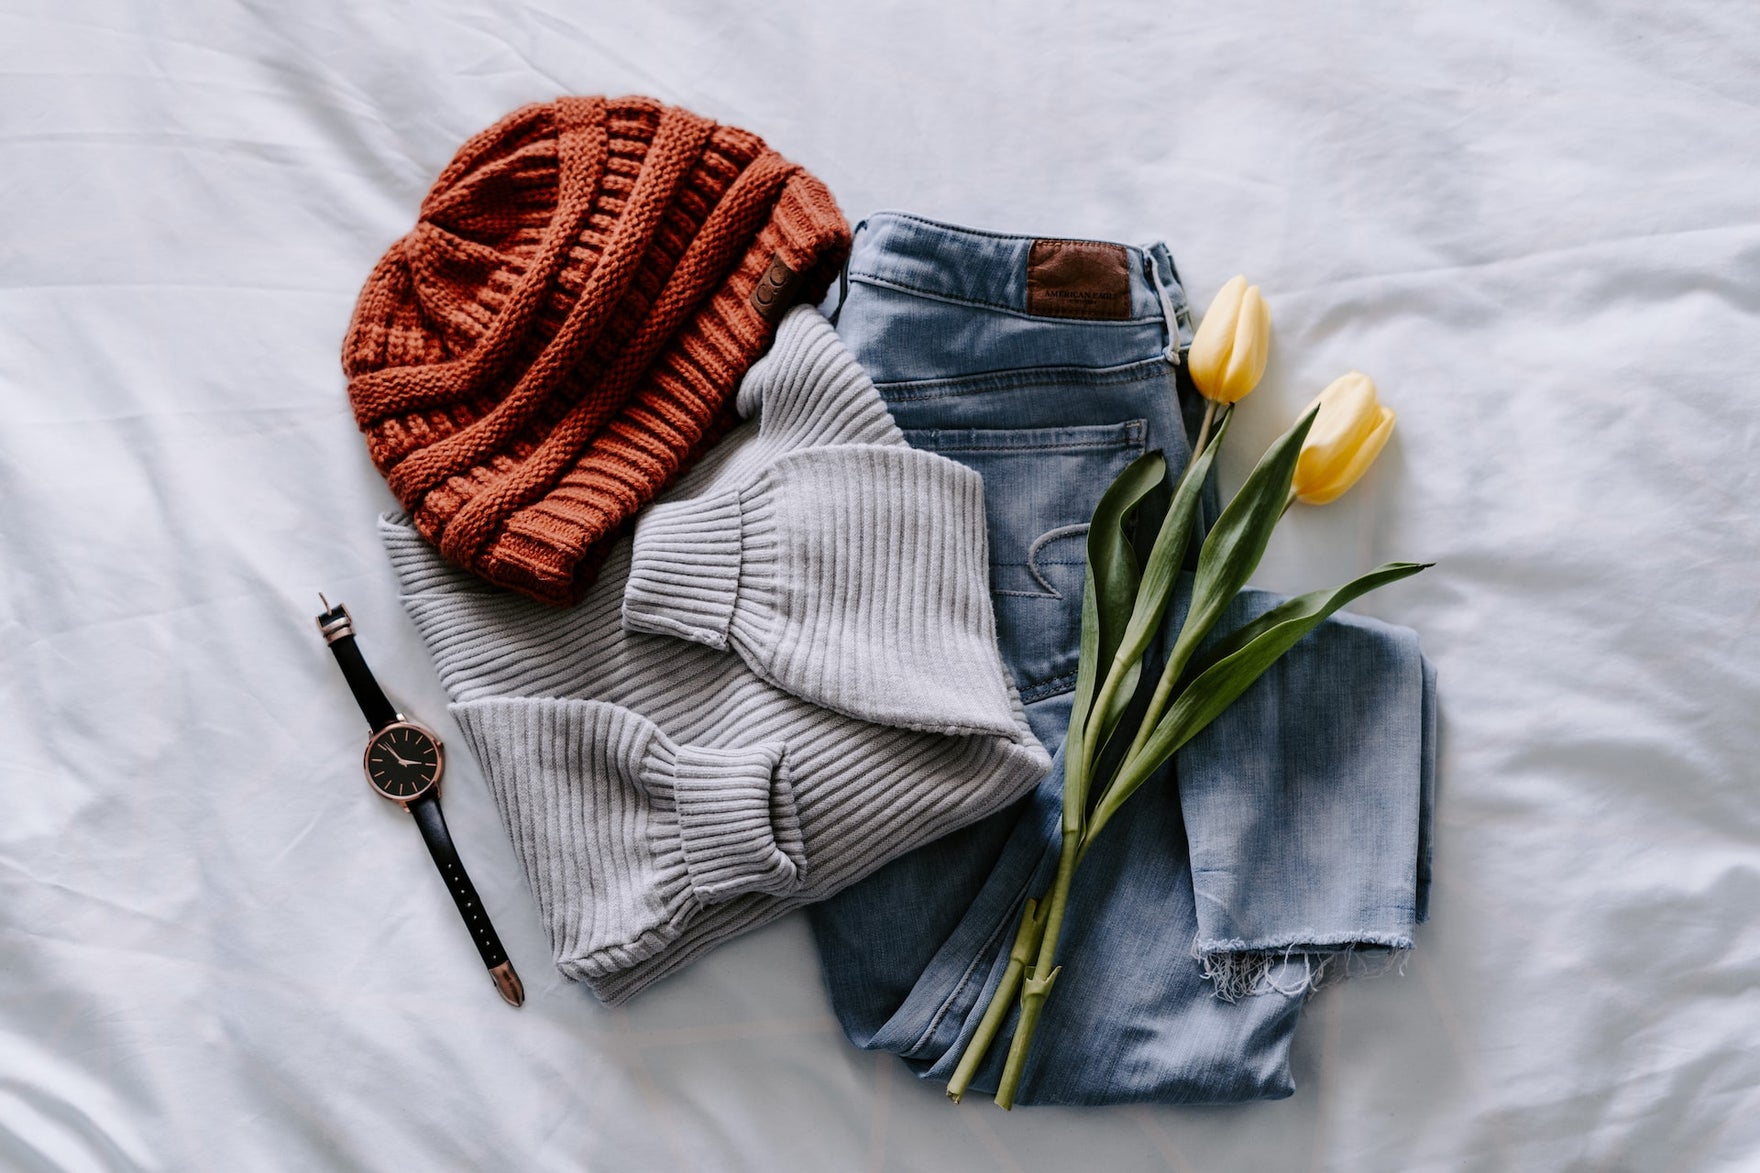 A red hat, grey sweater, jeans, watch, and yellow flowers piled on a white wheet